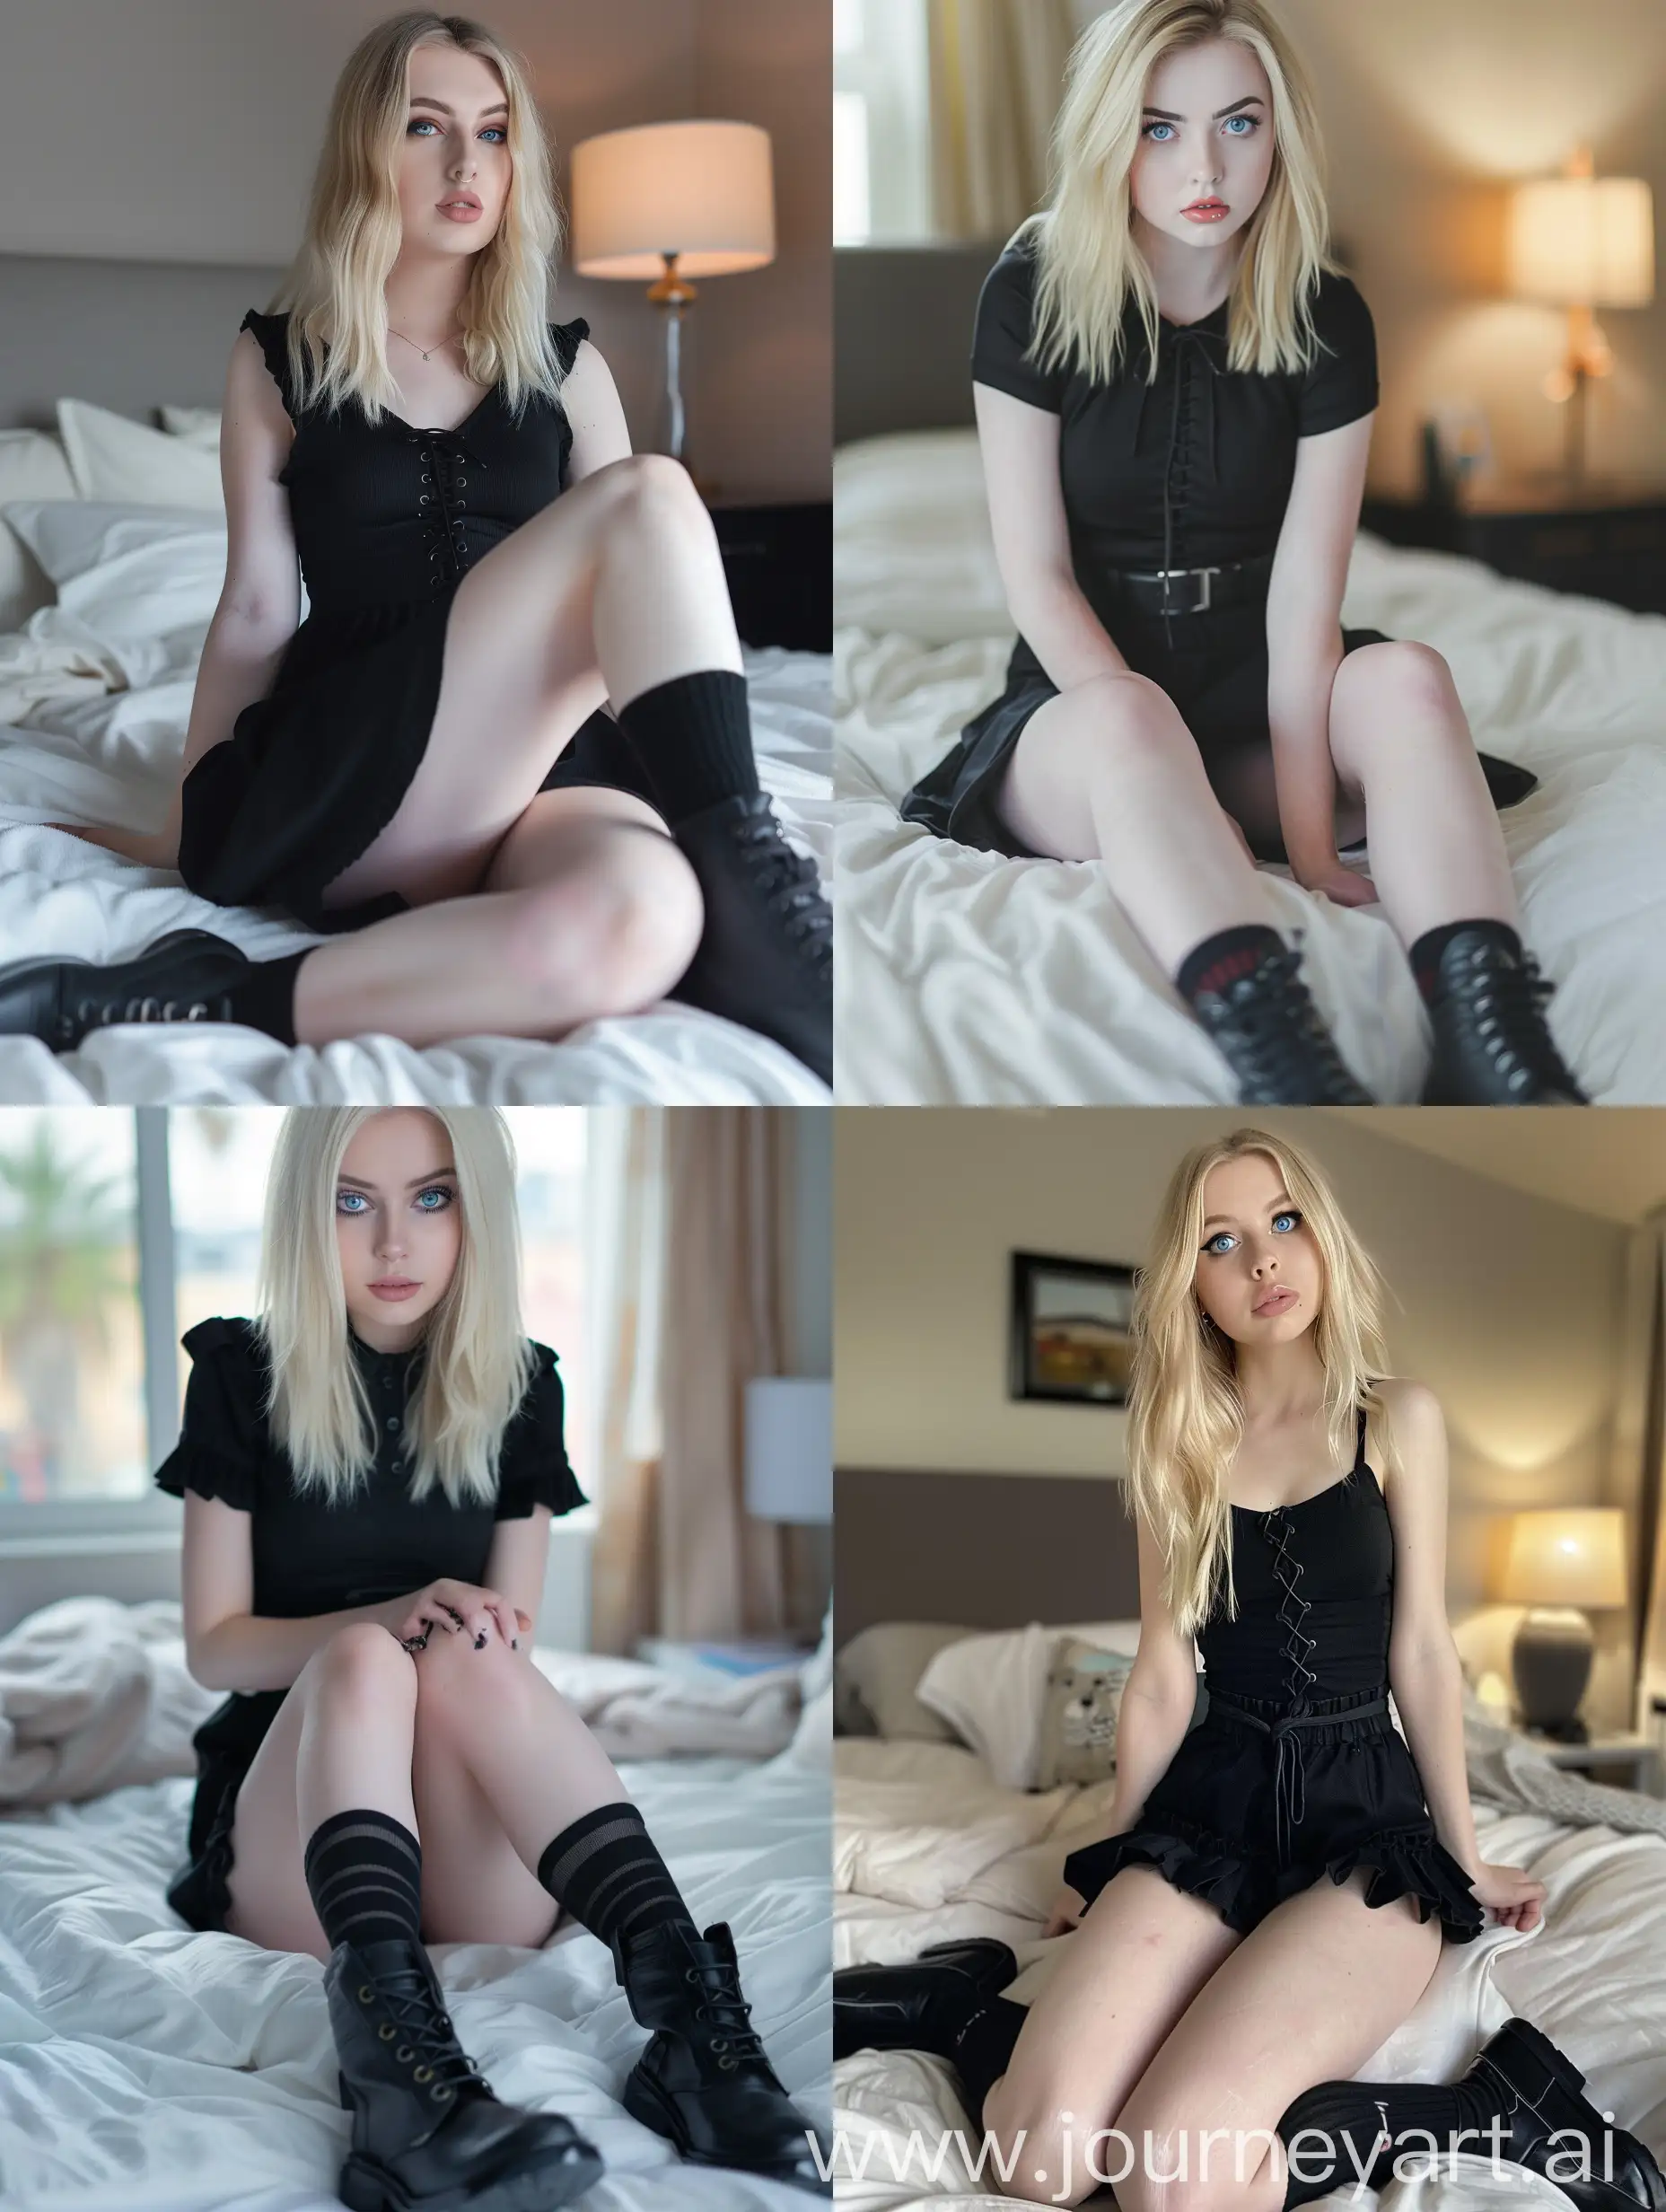 Influencer-Beauty-Young-Woman-in-Black-Dress-Sitting-on-Bed